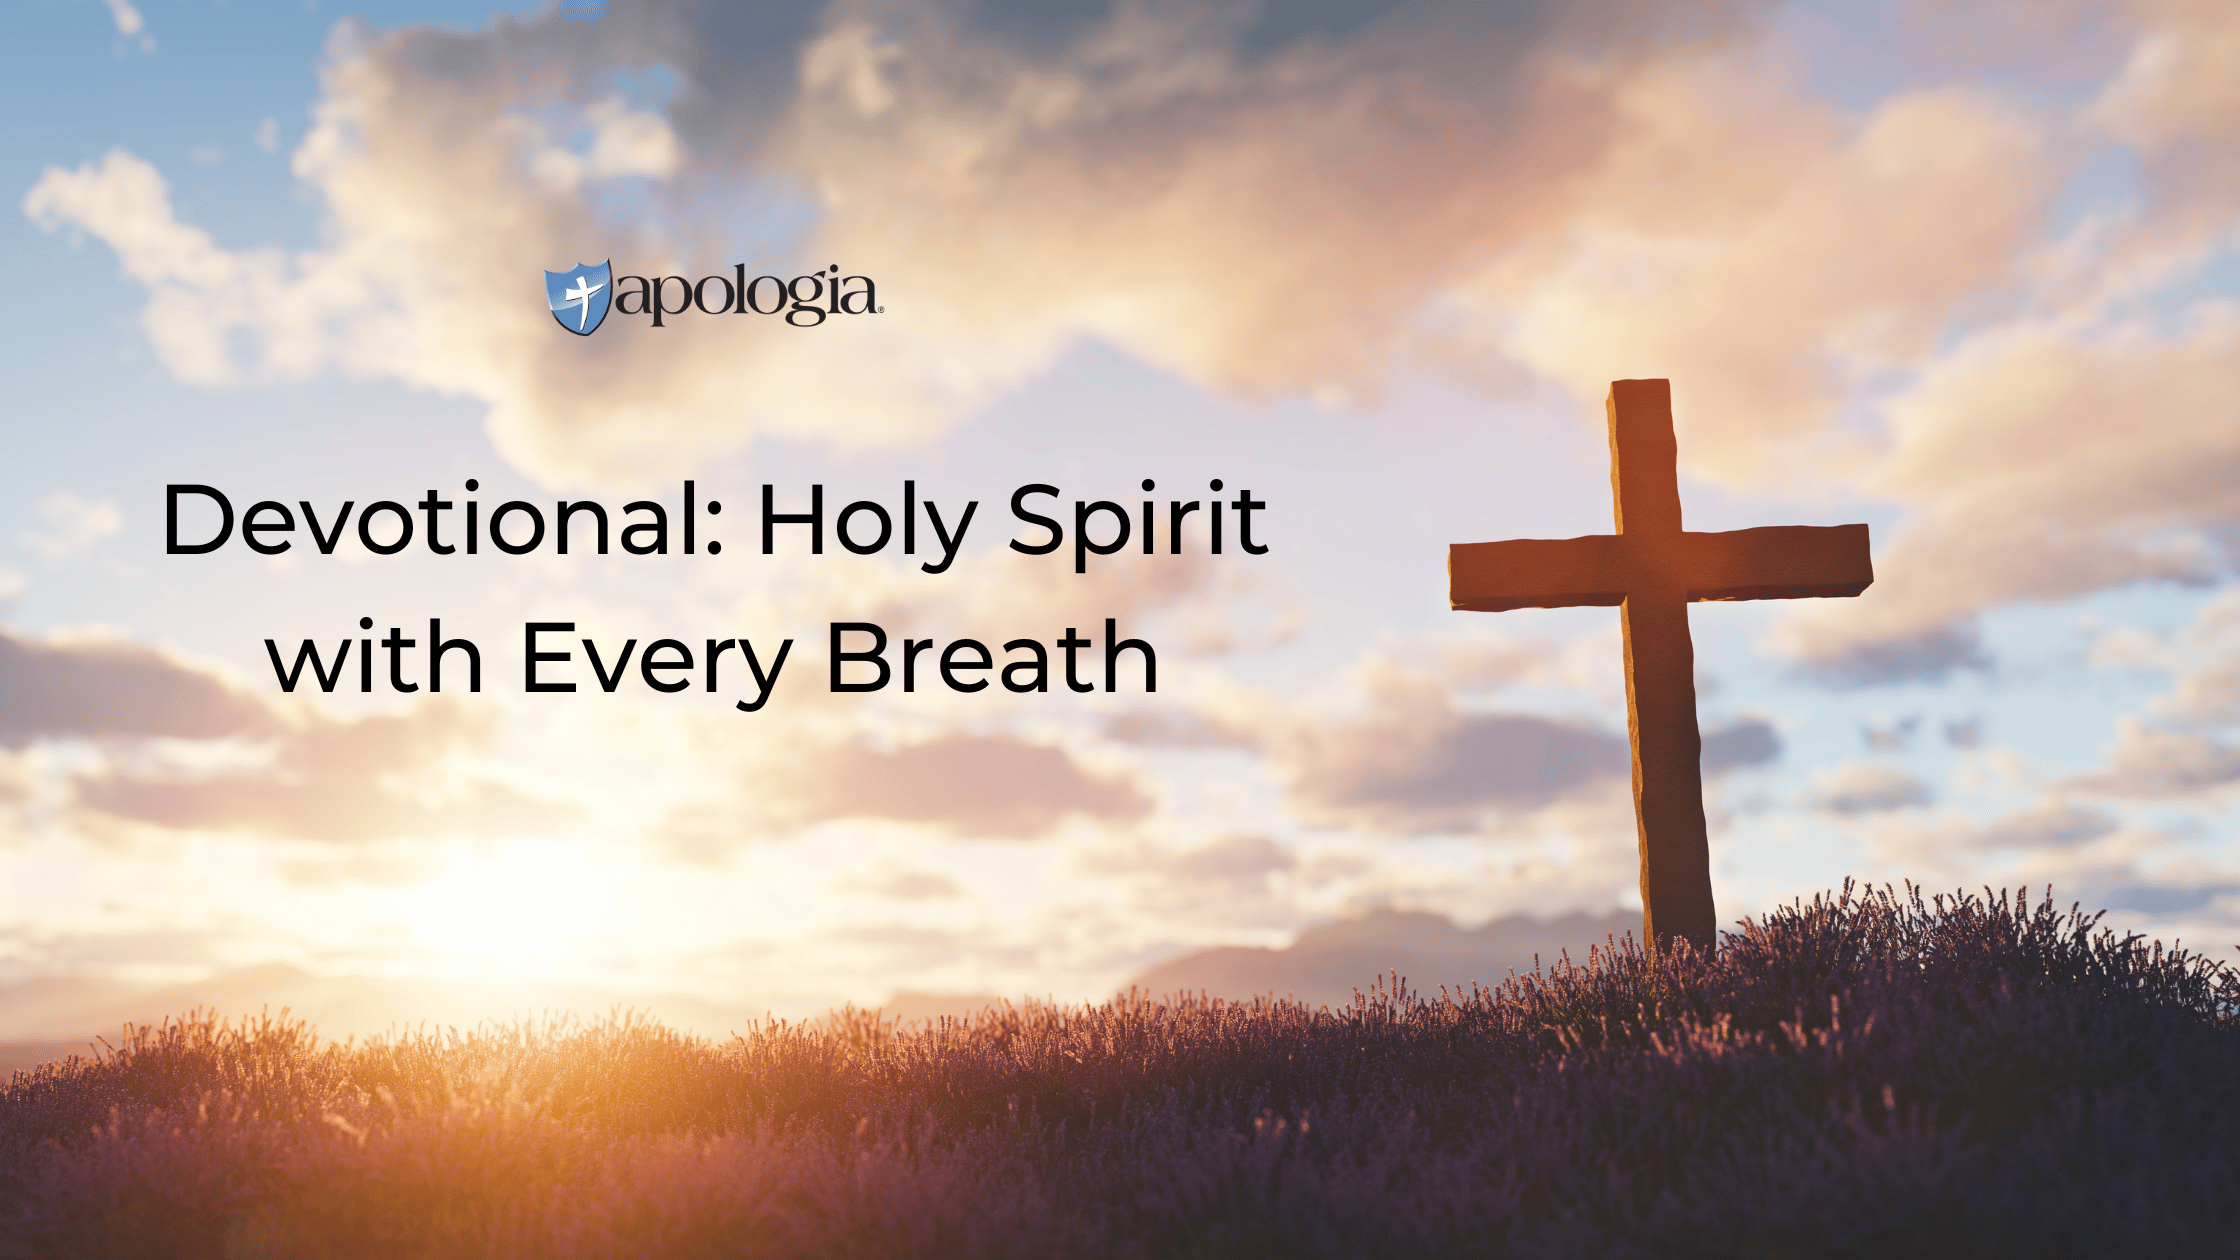 Devotional: Holy Spirit with Every Breath